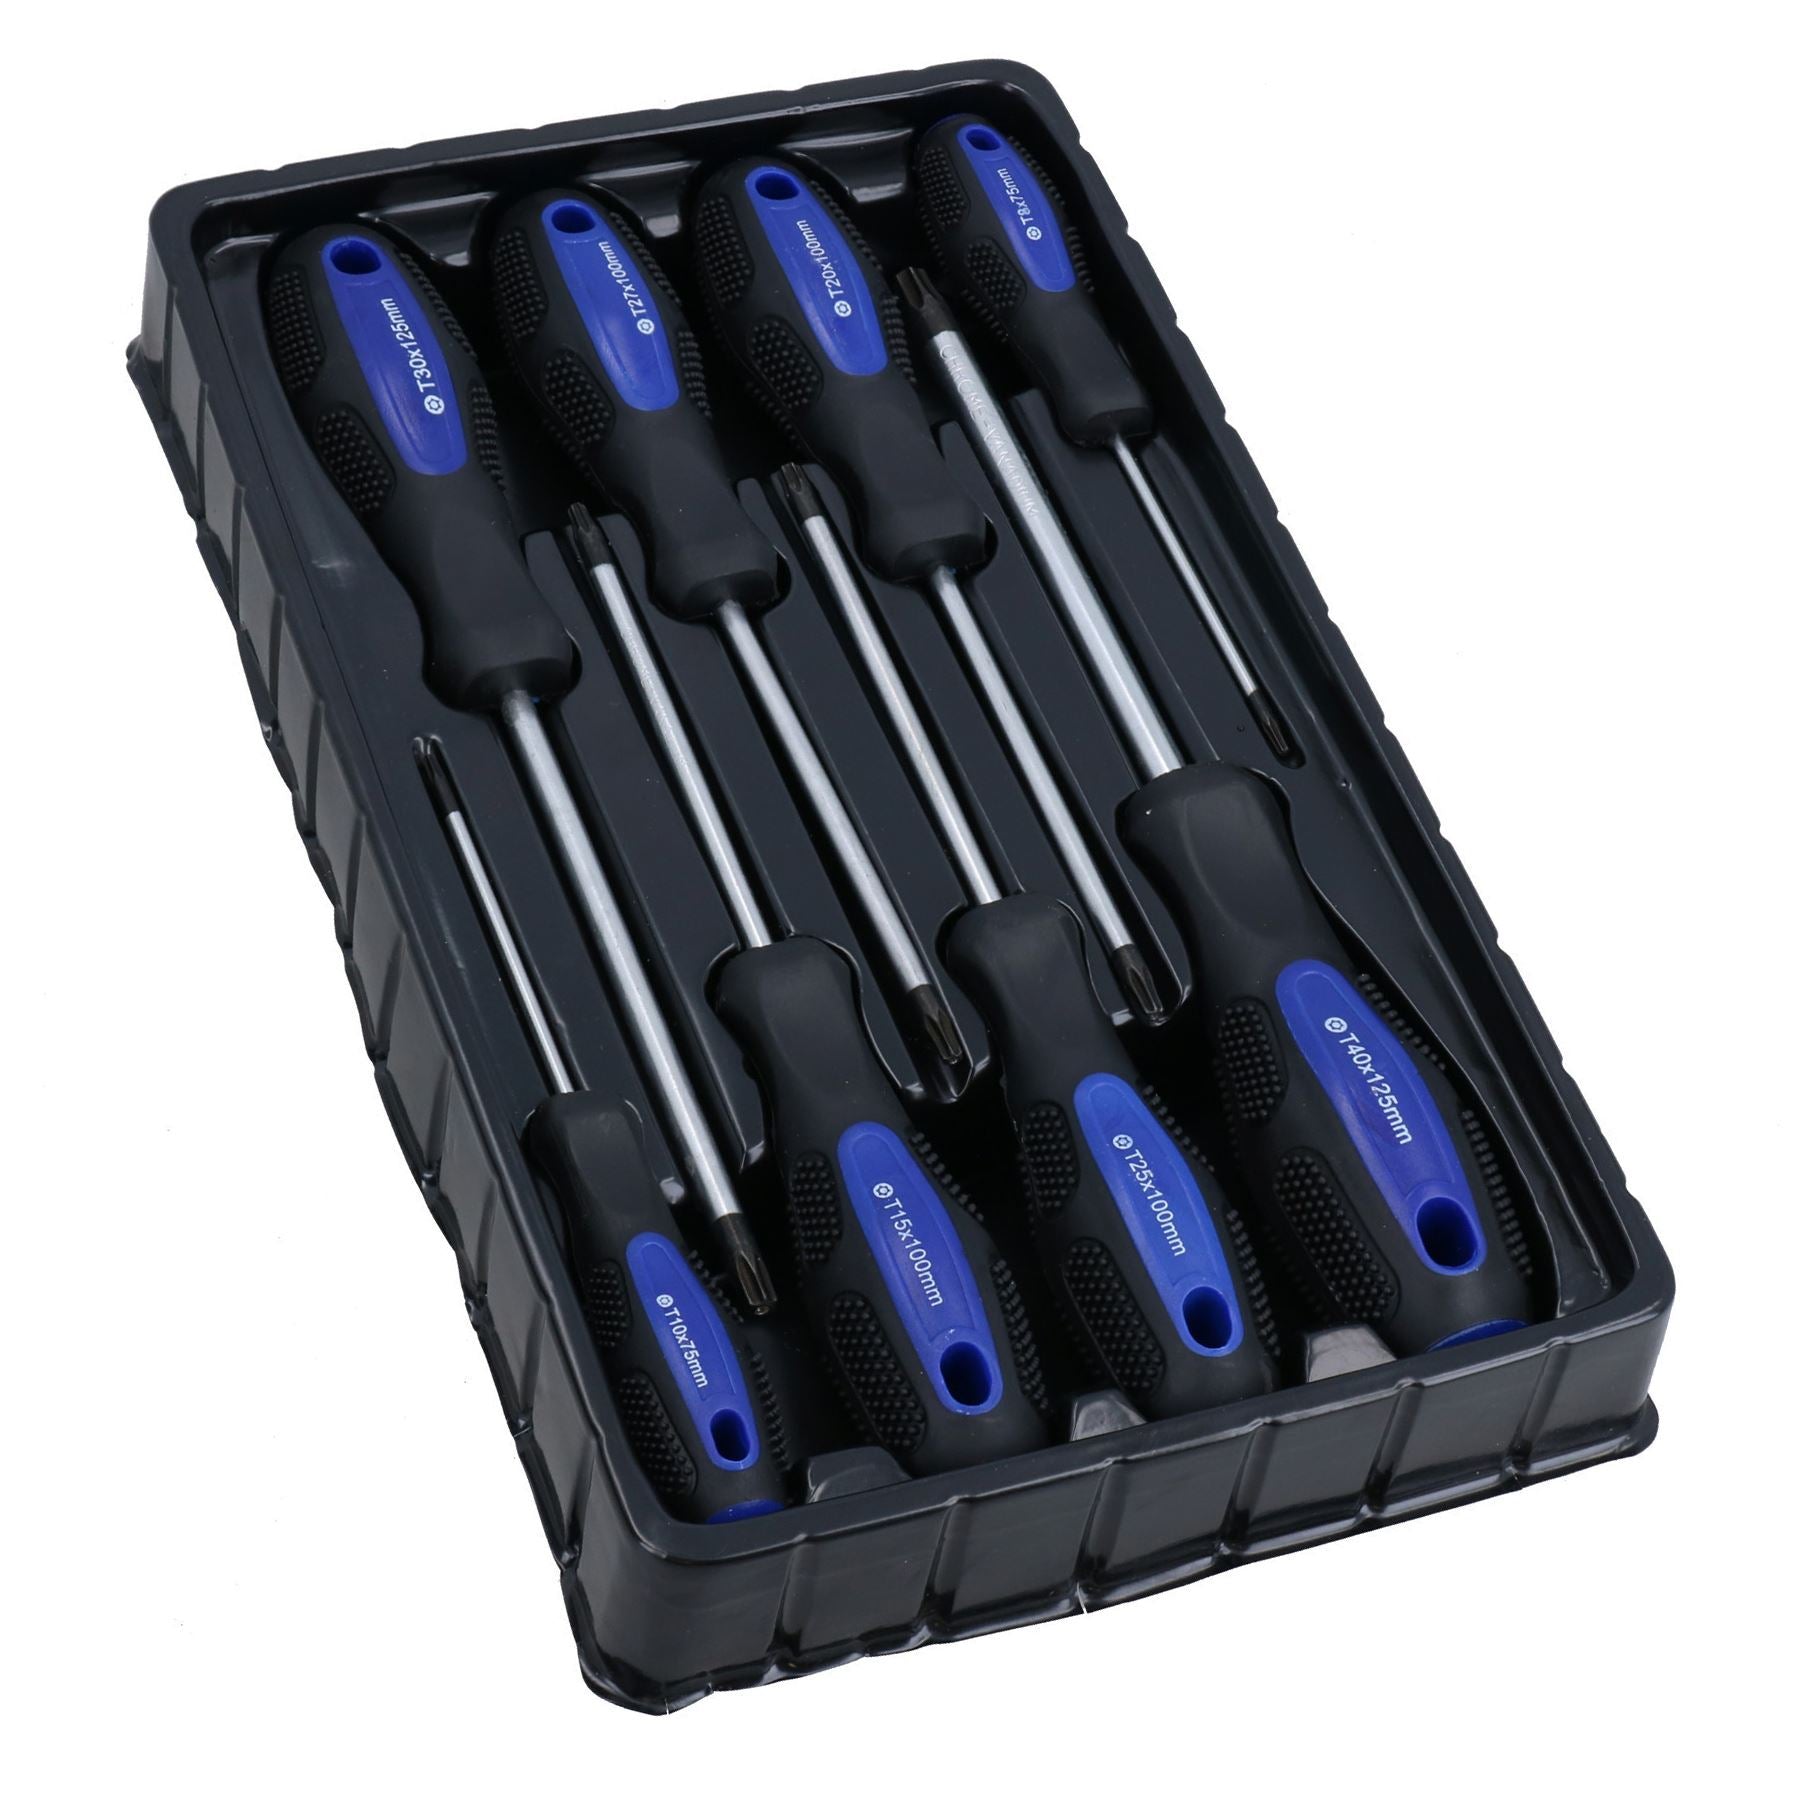 8pc Tamper Torx Star Screwdriver Set With Rubber Cushioned Grip T8 – T40